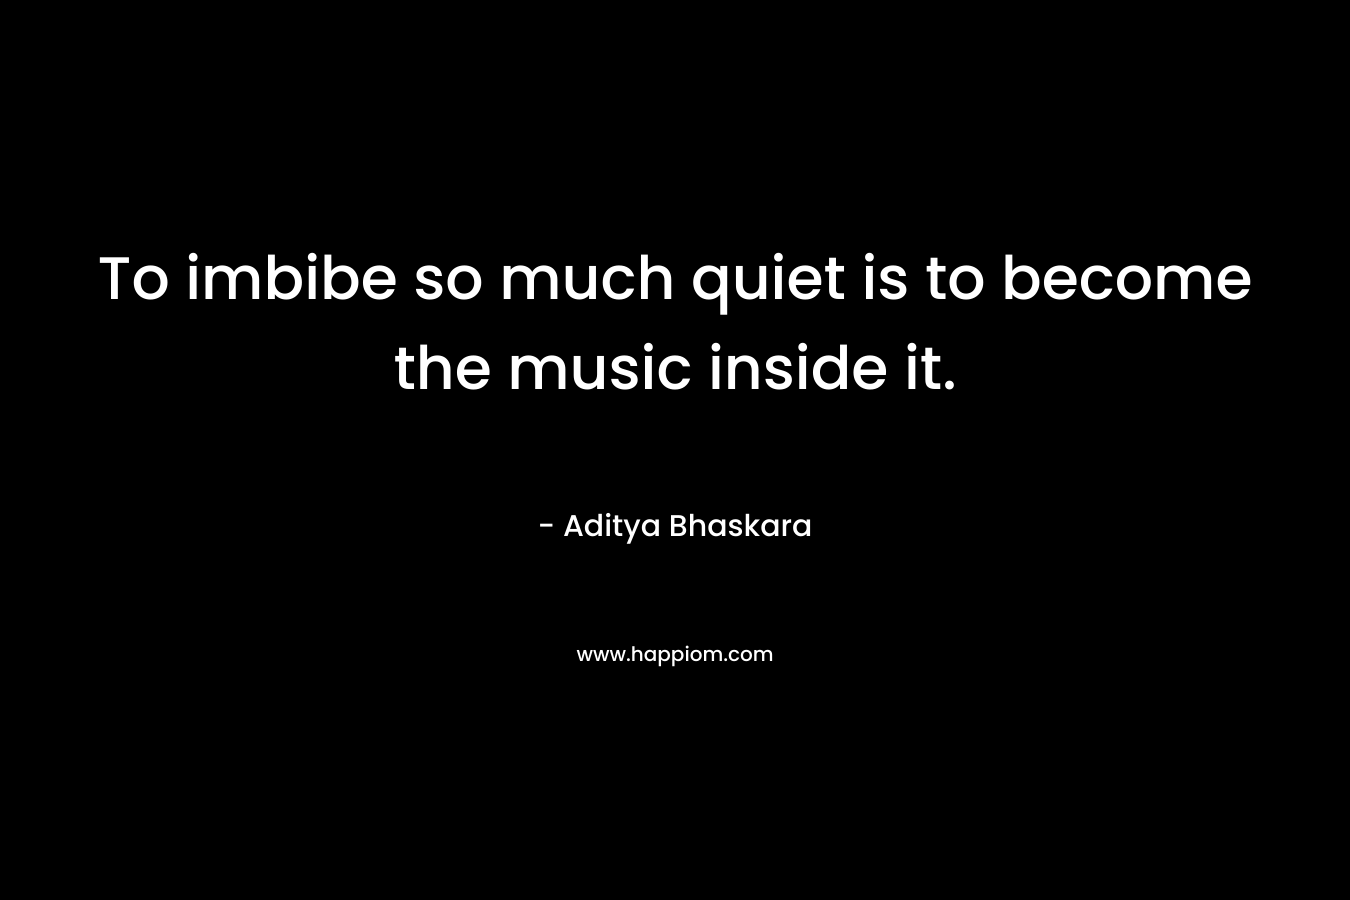 To imbibe so much quiet is to become the music inside it.